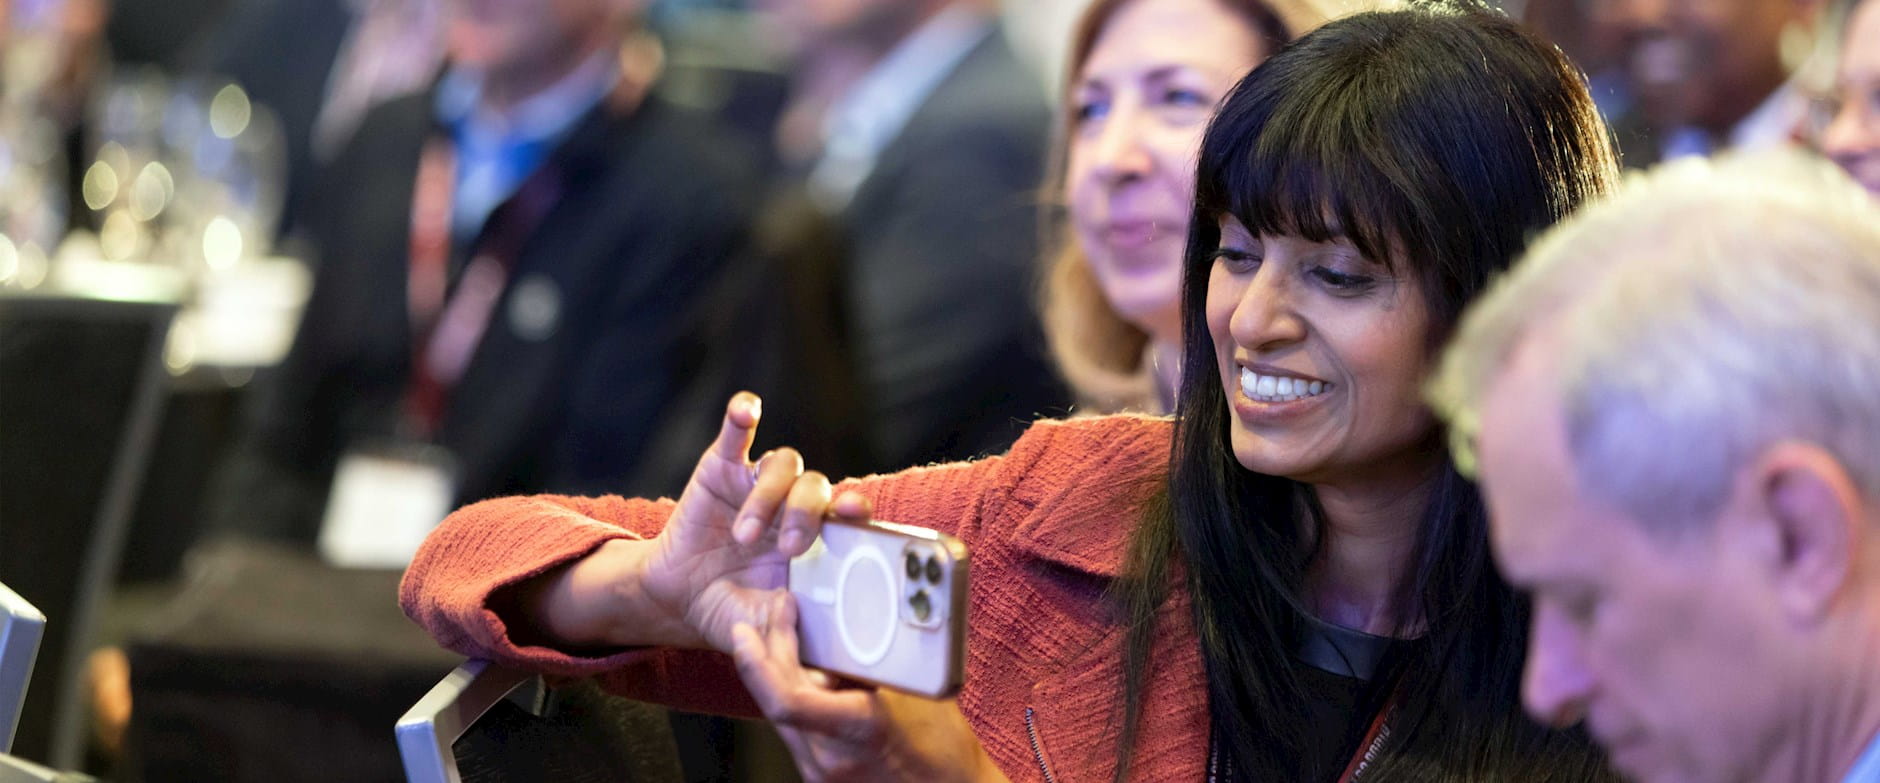 An audience member taking a photograph with a smartphone